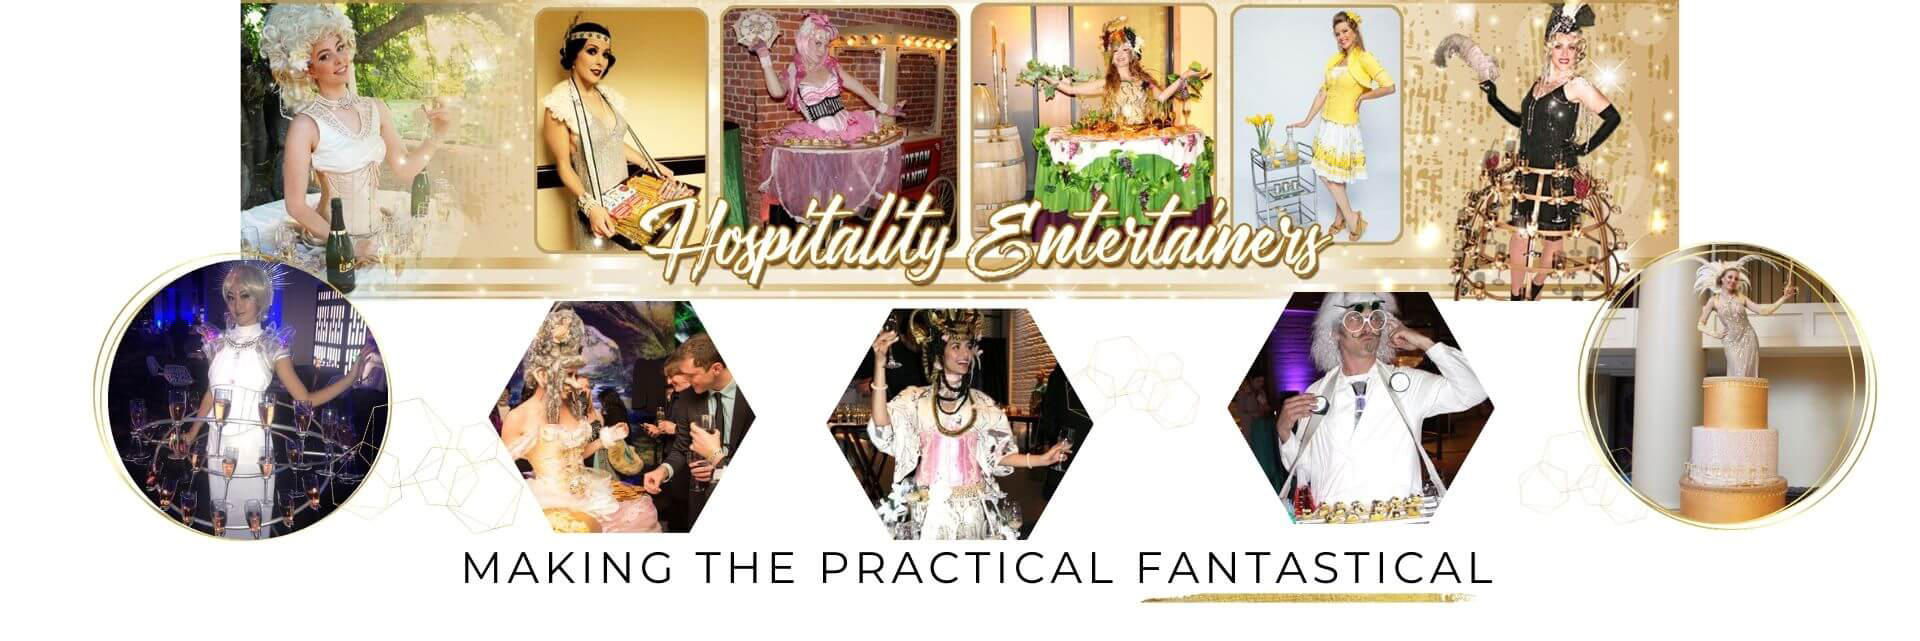 Hospitality Entertainers & Talent by Catalyst Arts 